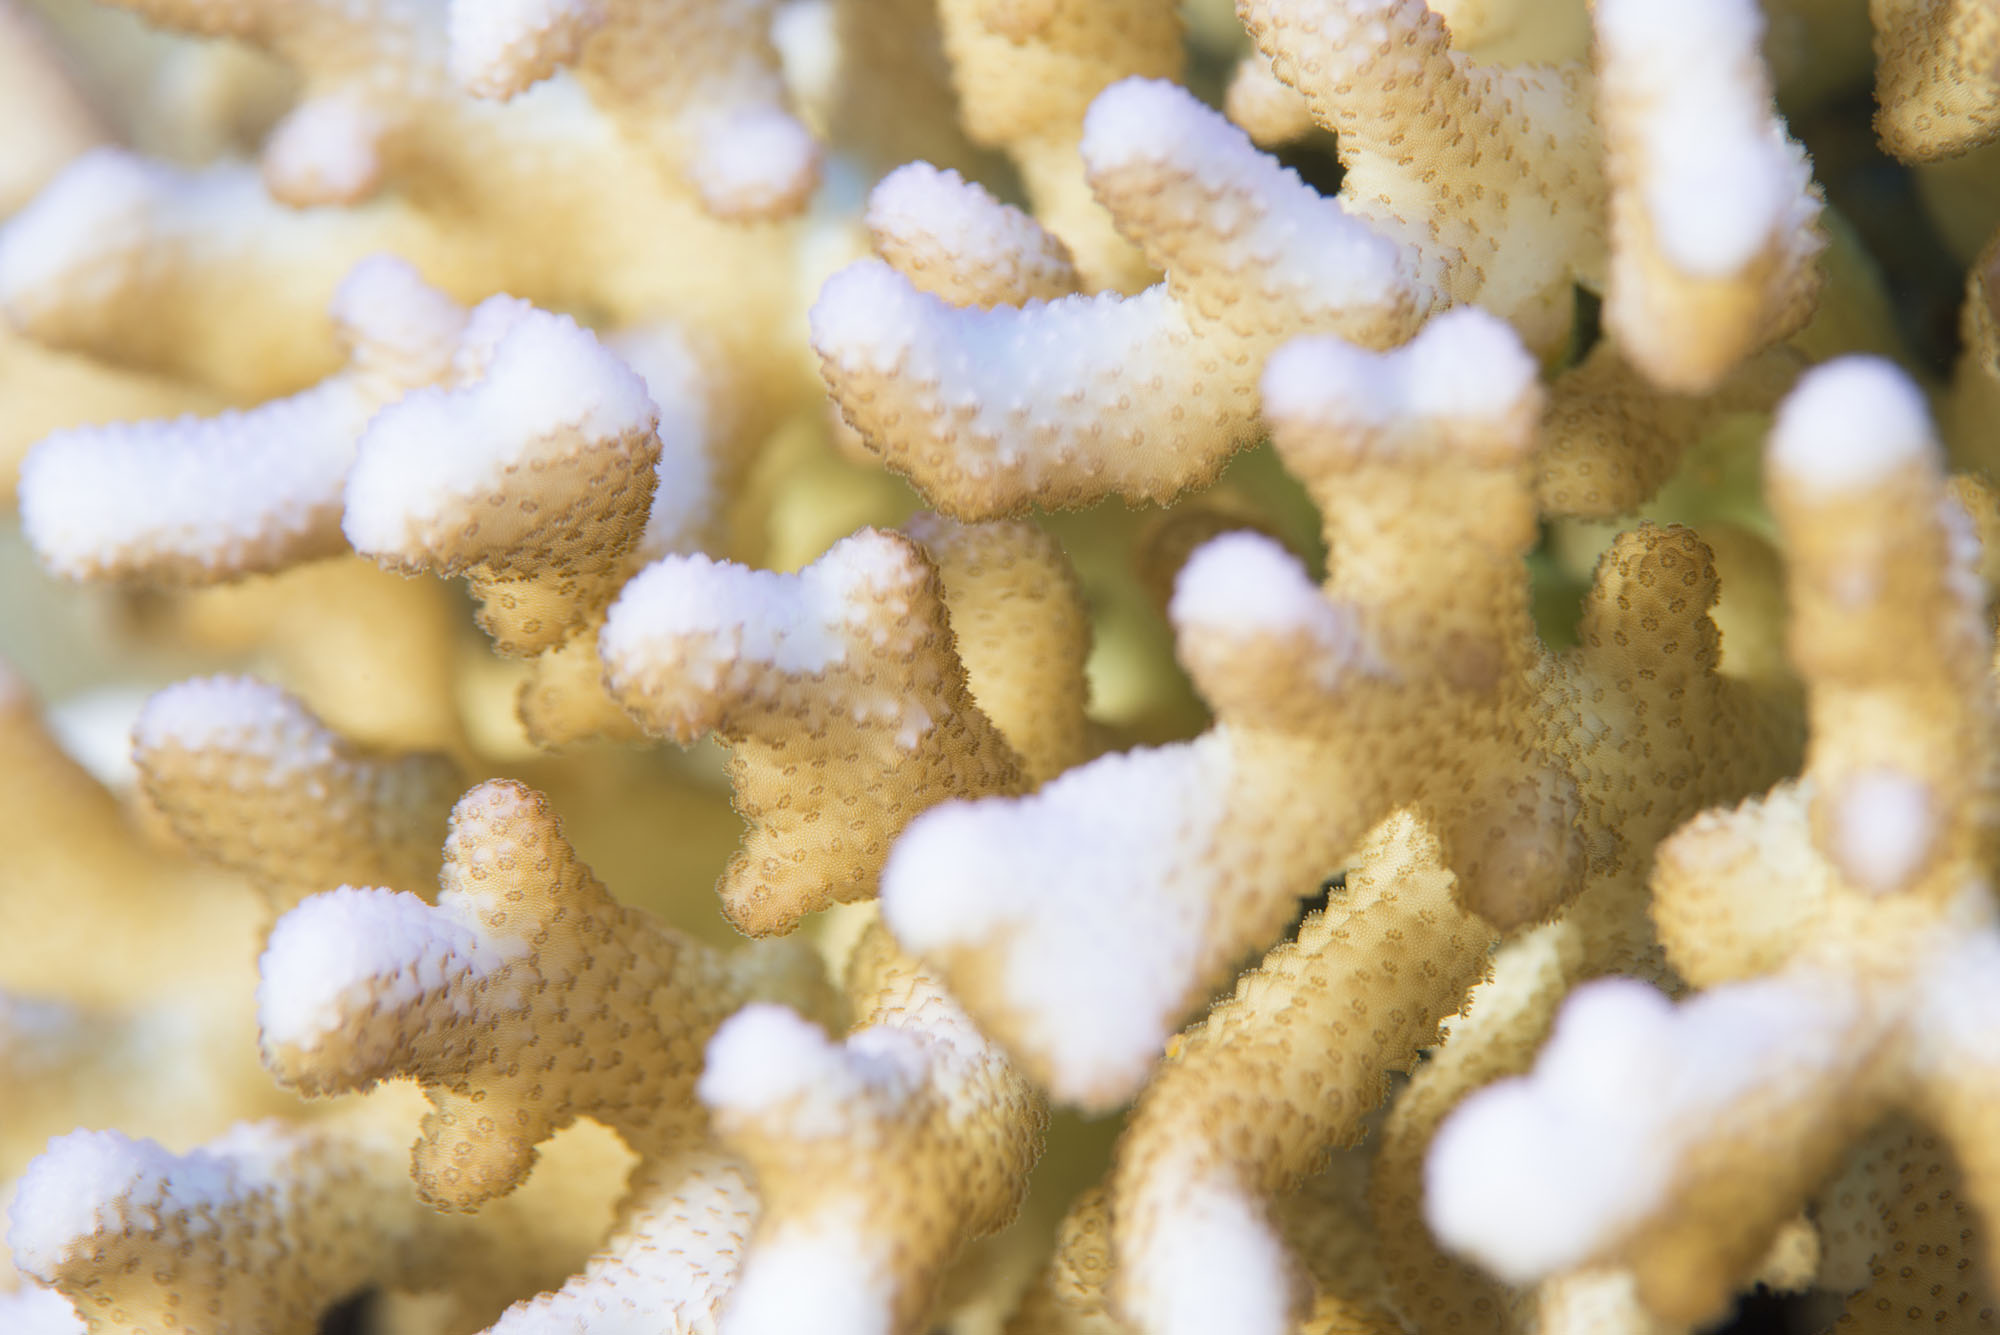 An extreme close-up of a piece of coral which has been bleached white due to global warming and the water being too warm.